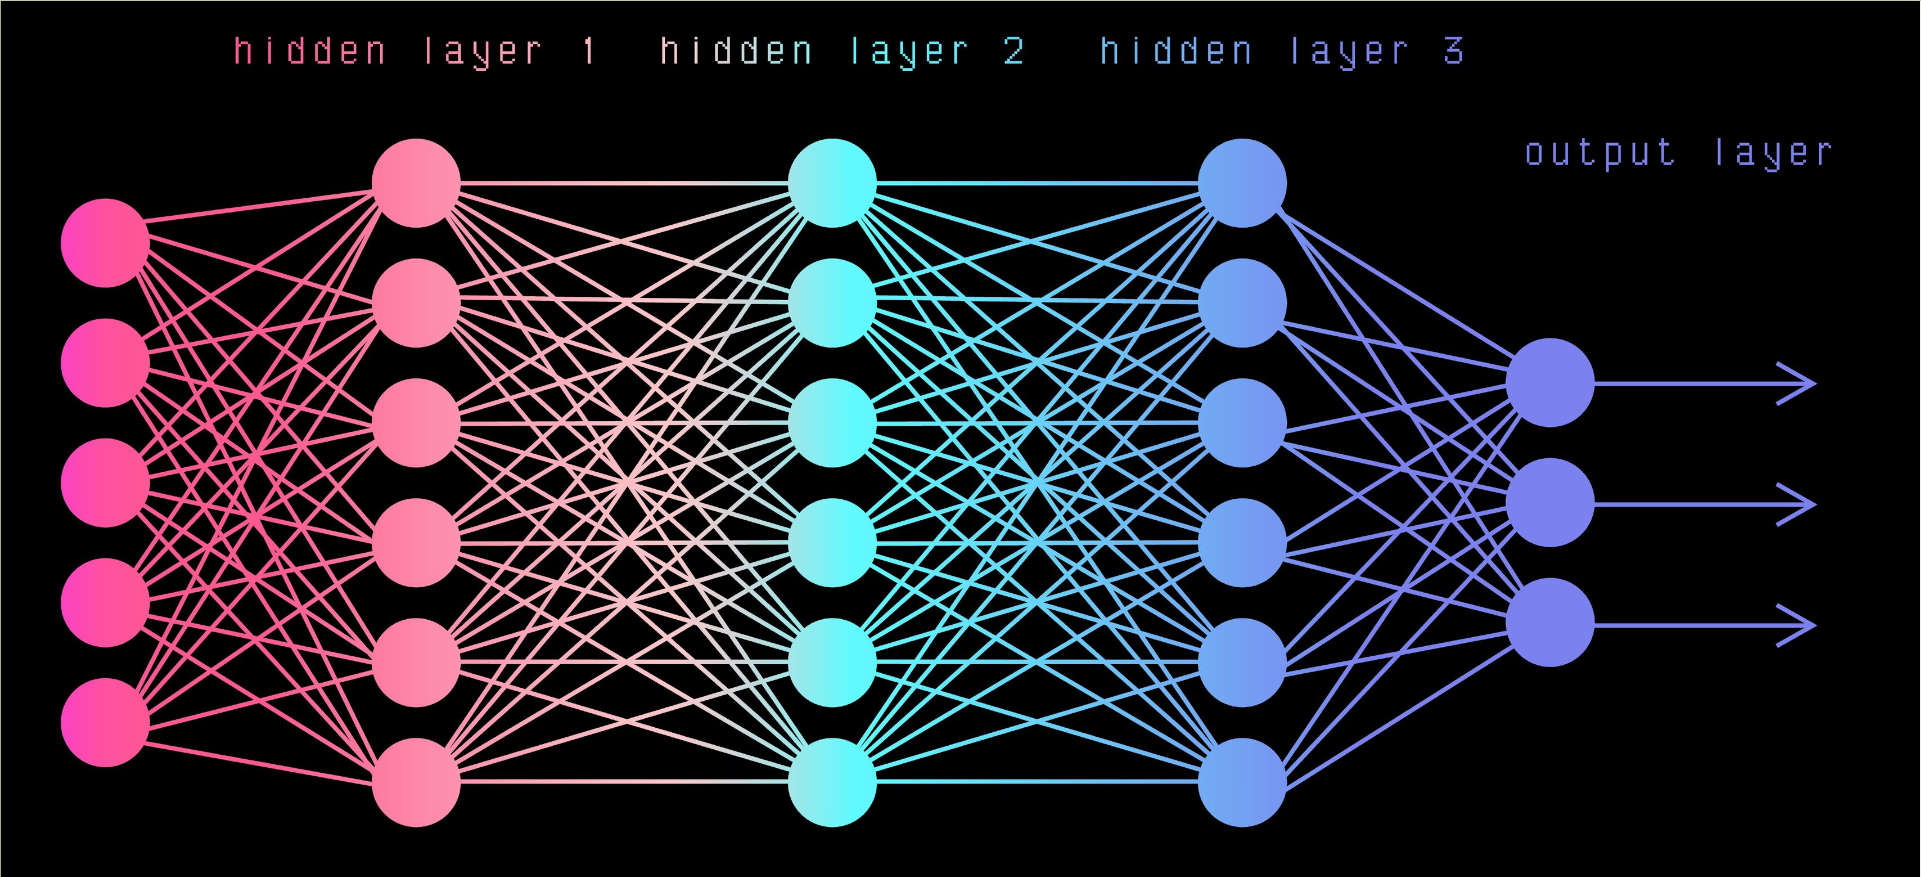 Basic Diagram of Neural Network - Input layer, hidden processing layer, and output layer